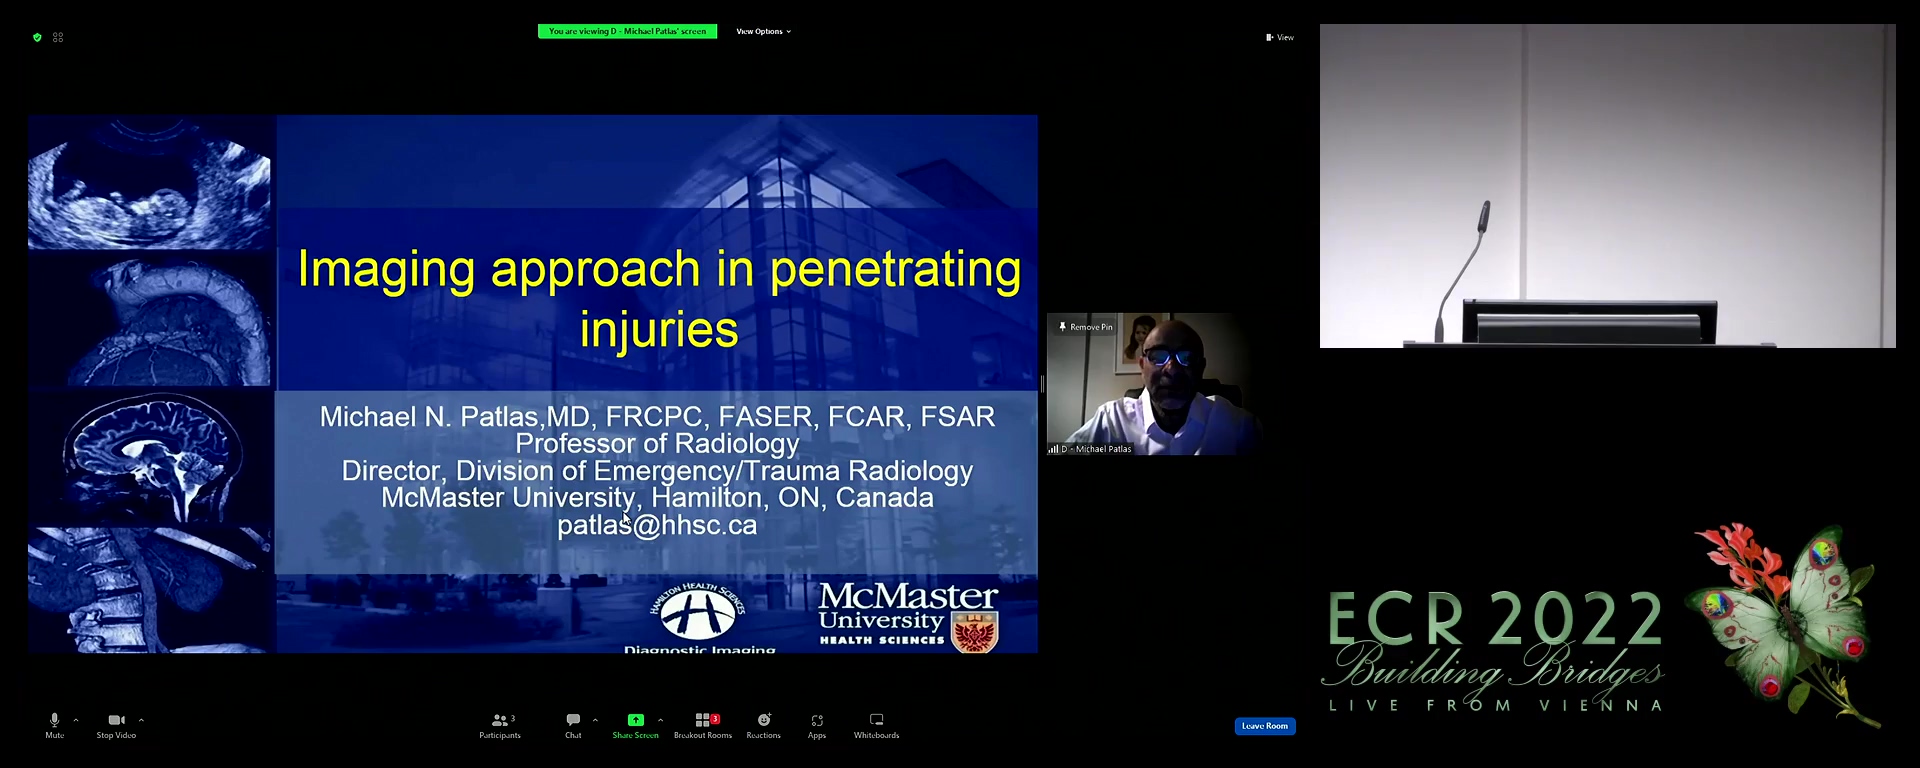 Imaging approach in penetrating injuries